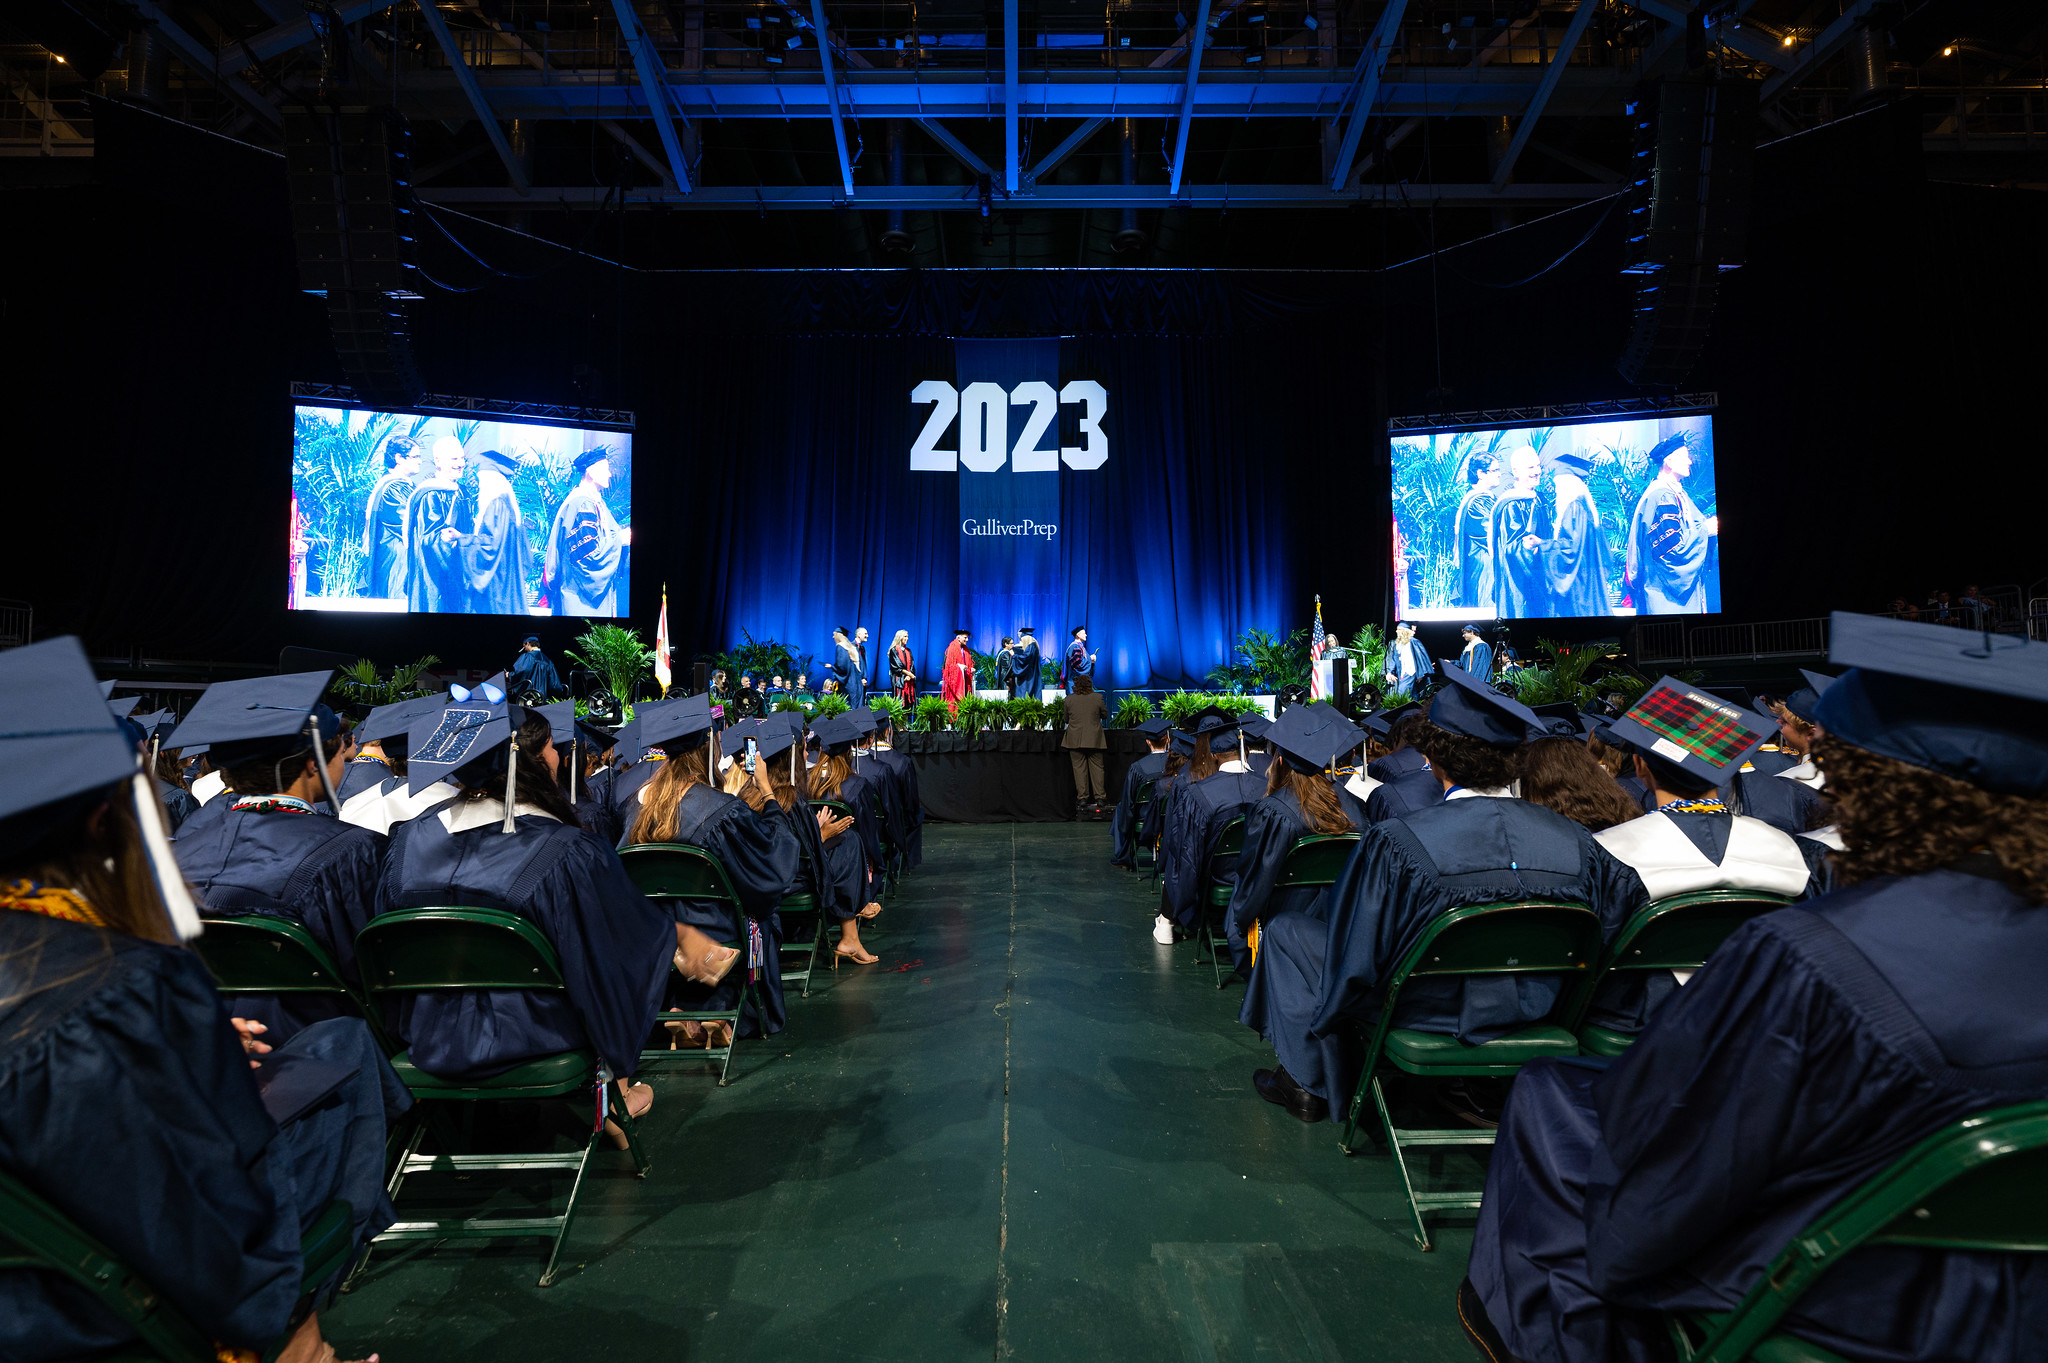 Class of 2023 Commencement